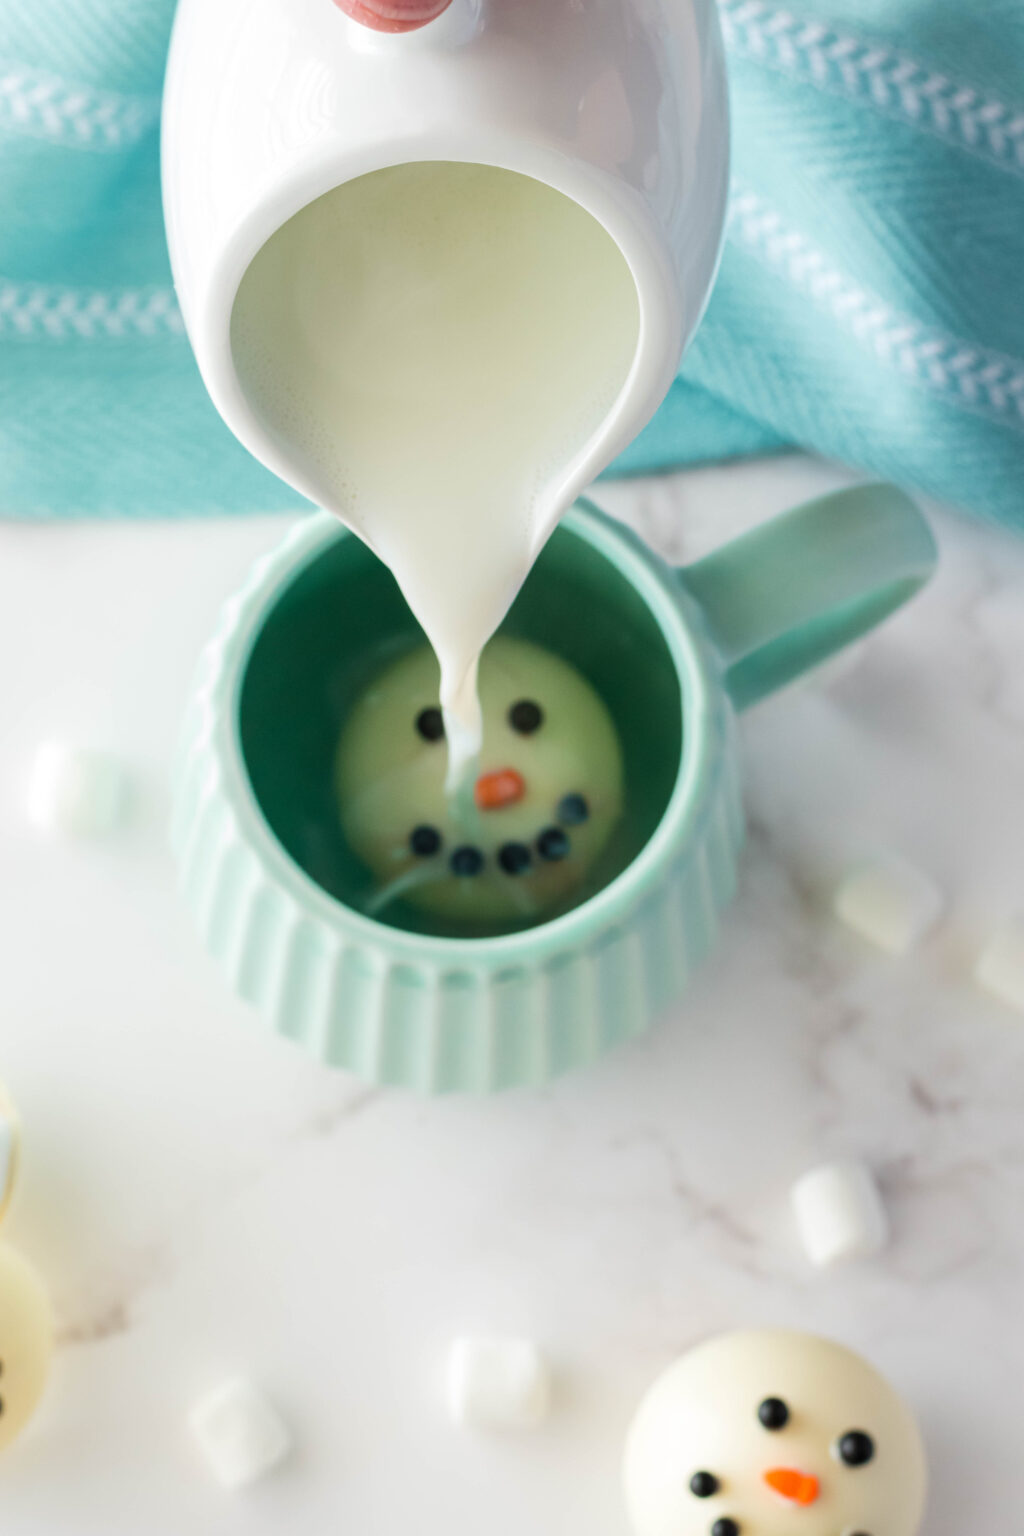 hot milk being poured into a mug with a snowman hot cocoa bomb inside